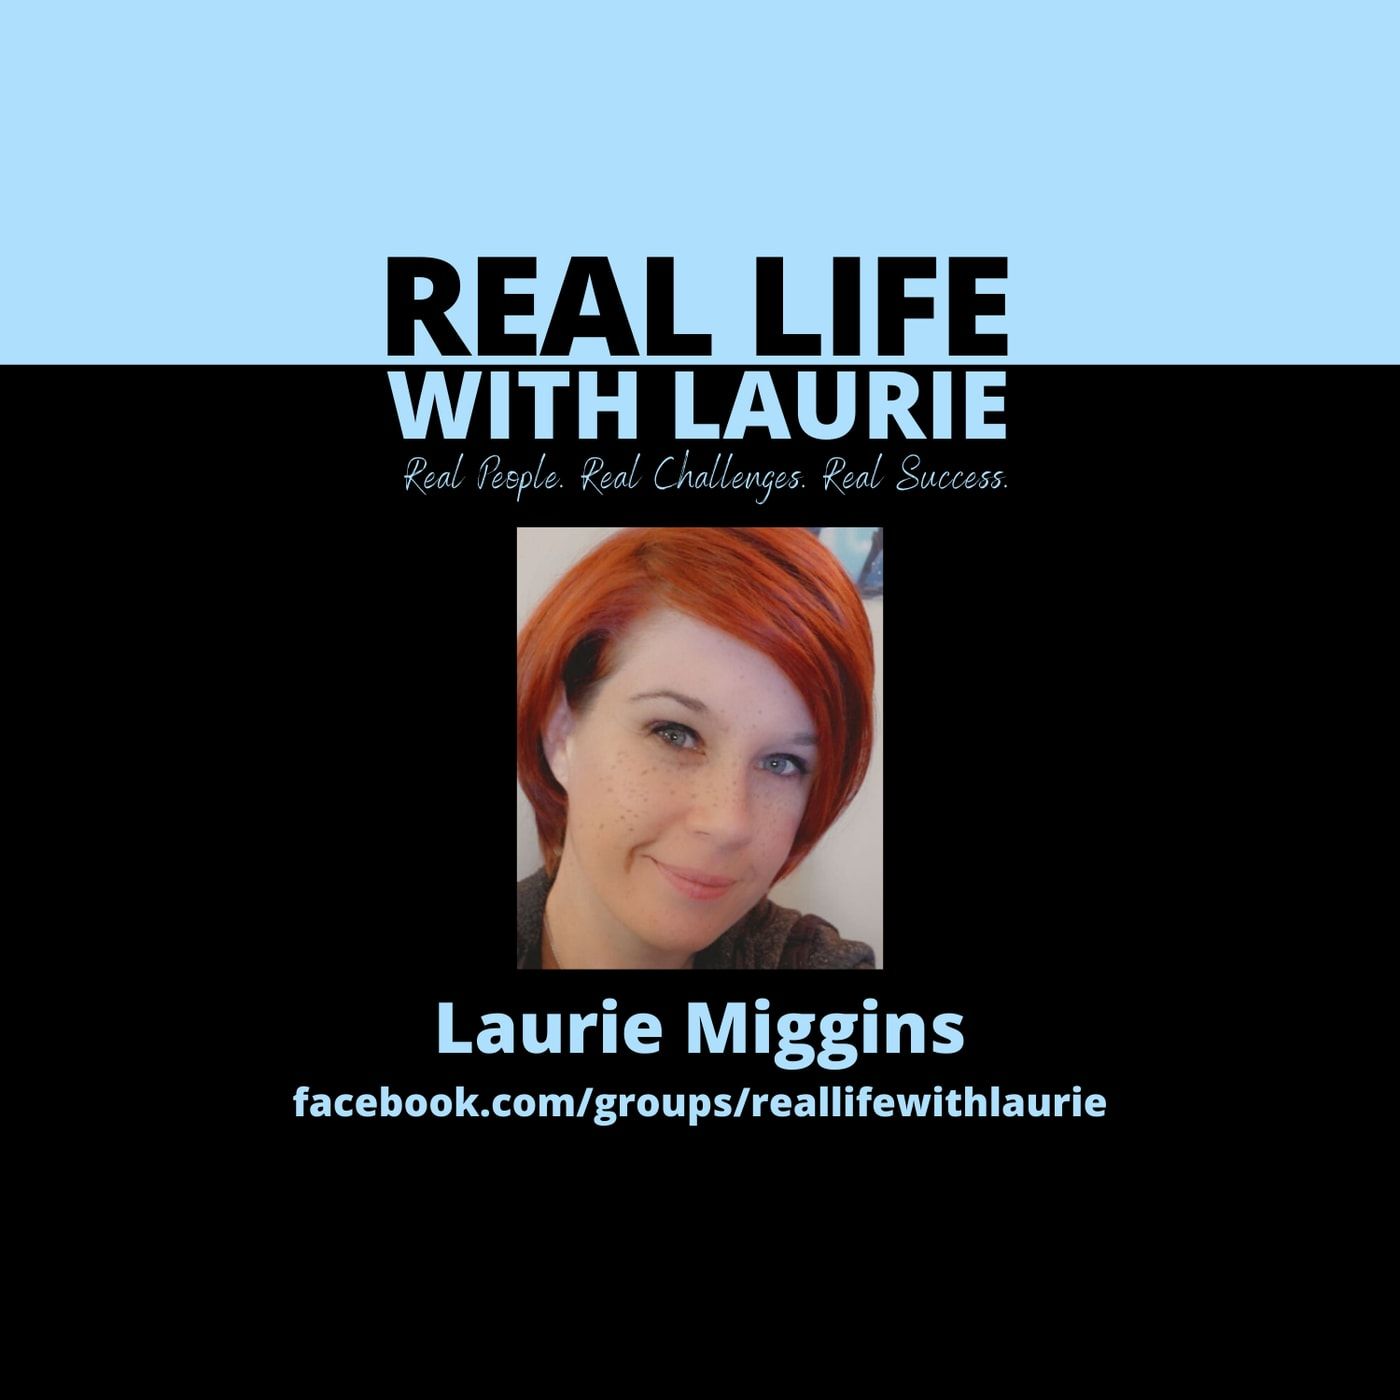 Real Life With Laurie